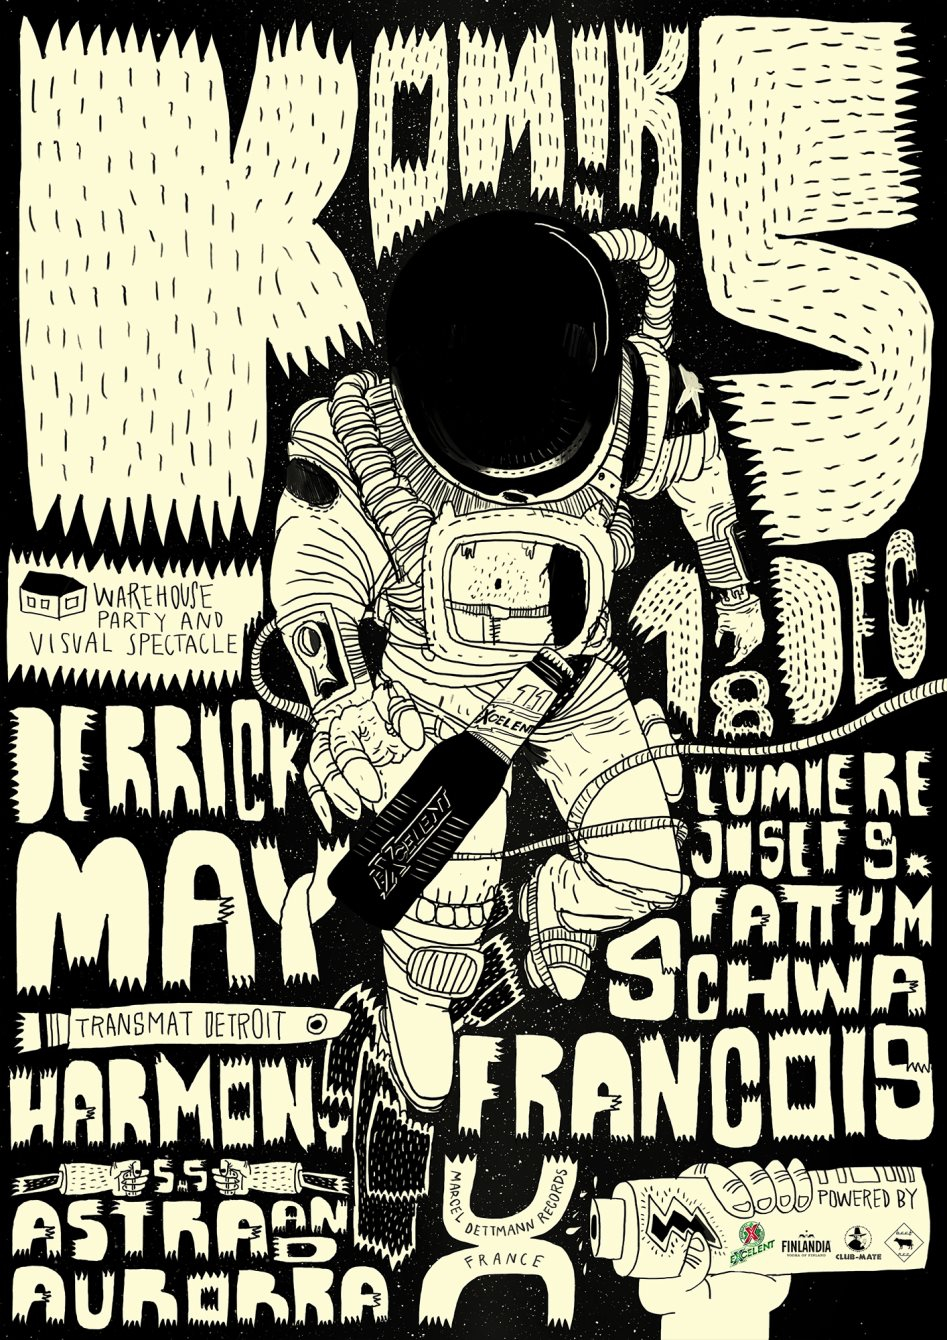 Komiks vol. 6 with Derrick May & Francois X - Flyer front